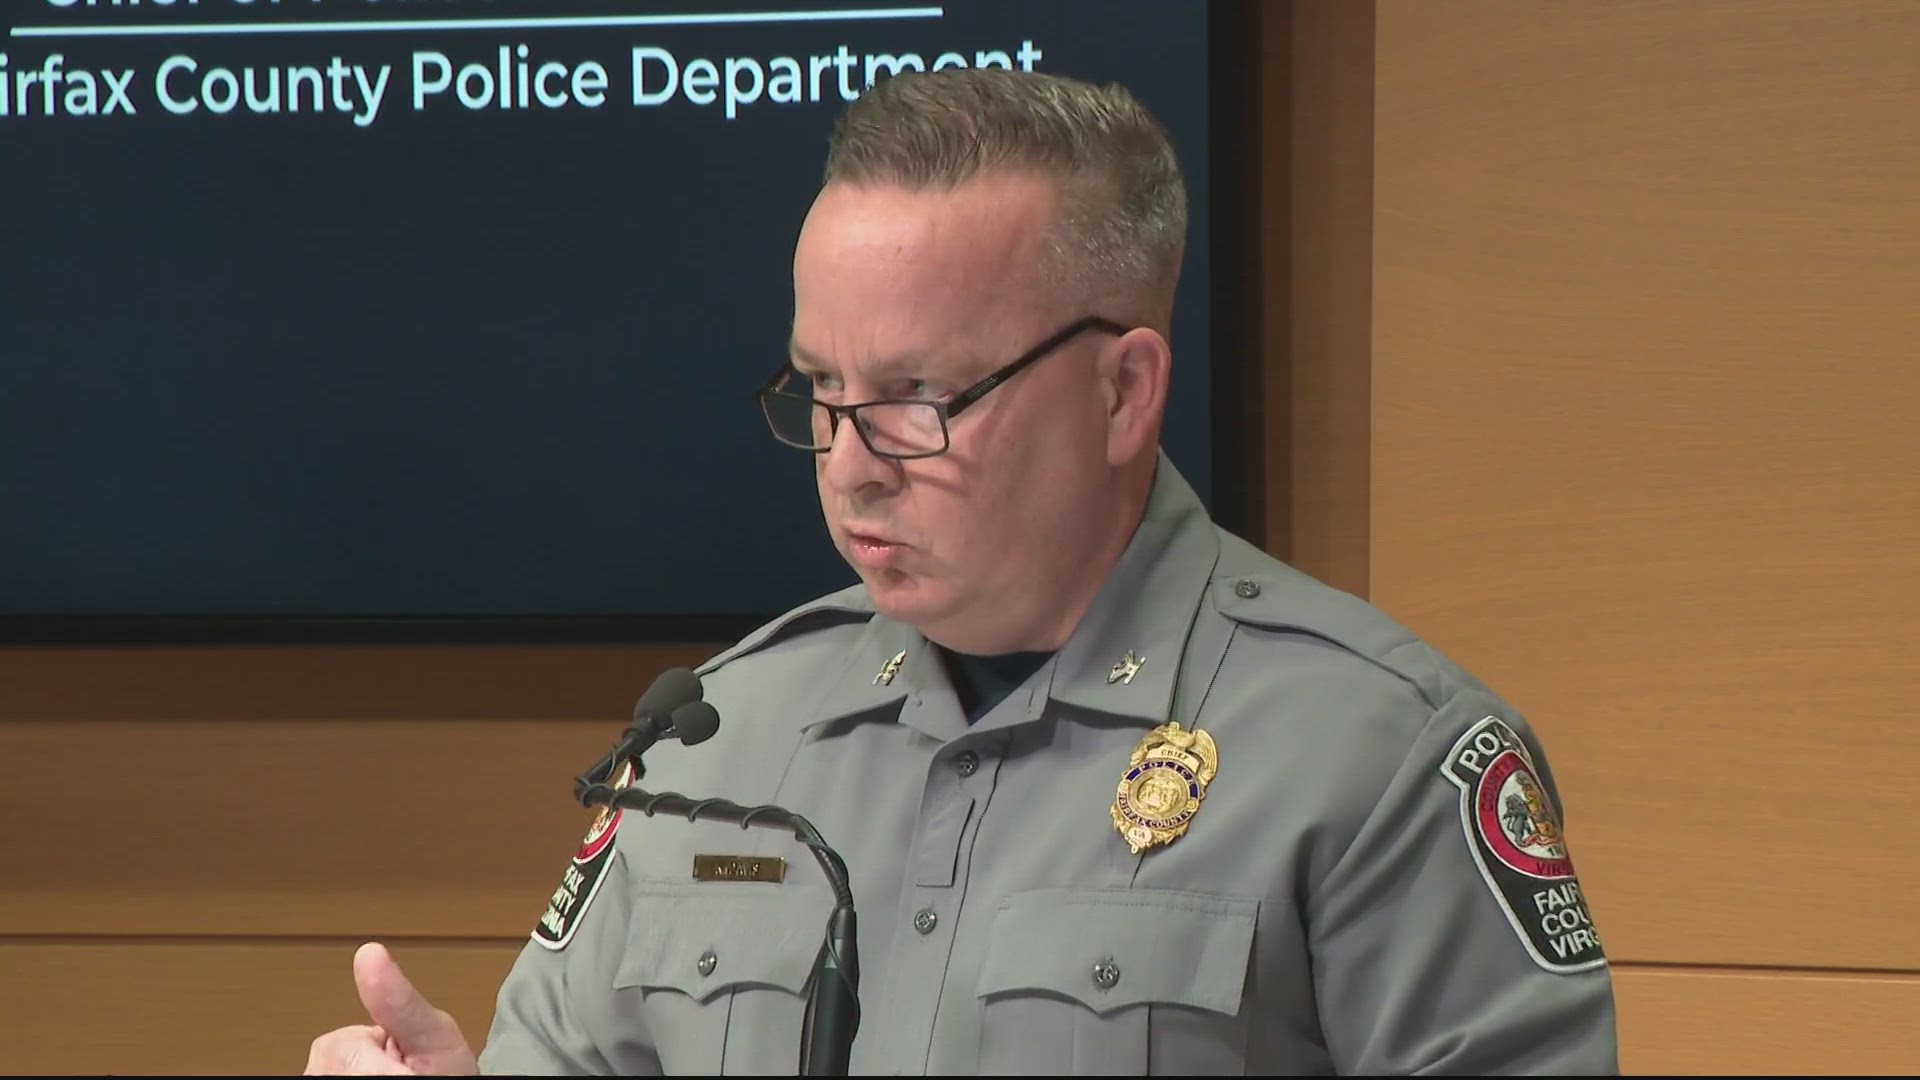 The chief says Sgt. Wesley Shifflett failed to meet department standards when he shot and killed a suspected shoplifter near Tysons Corner Center.